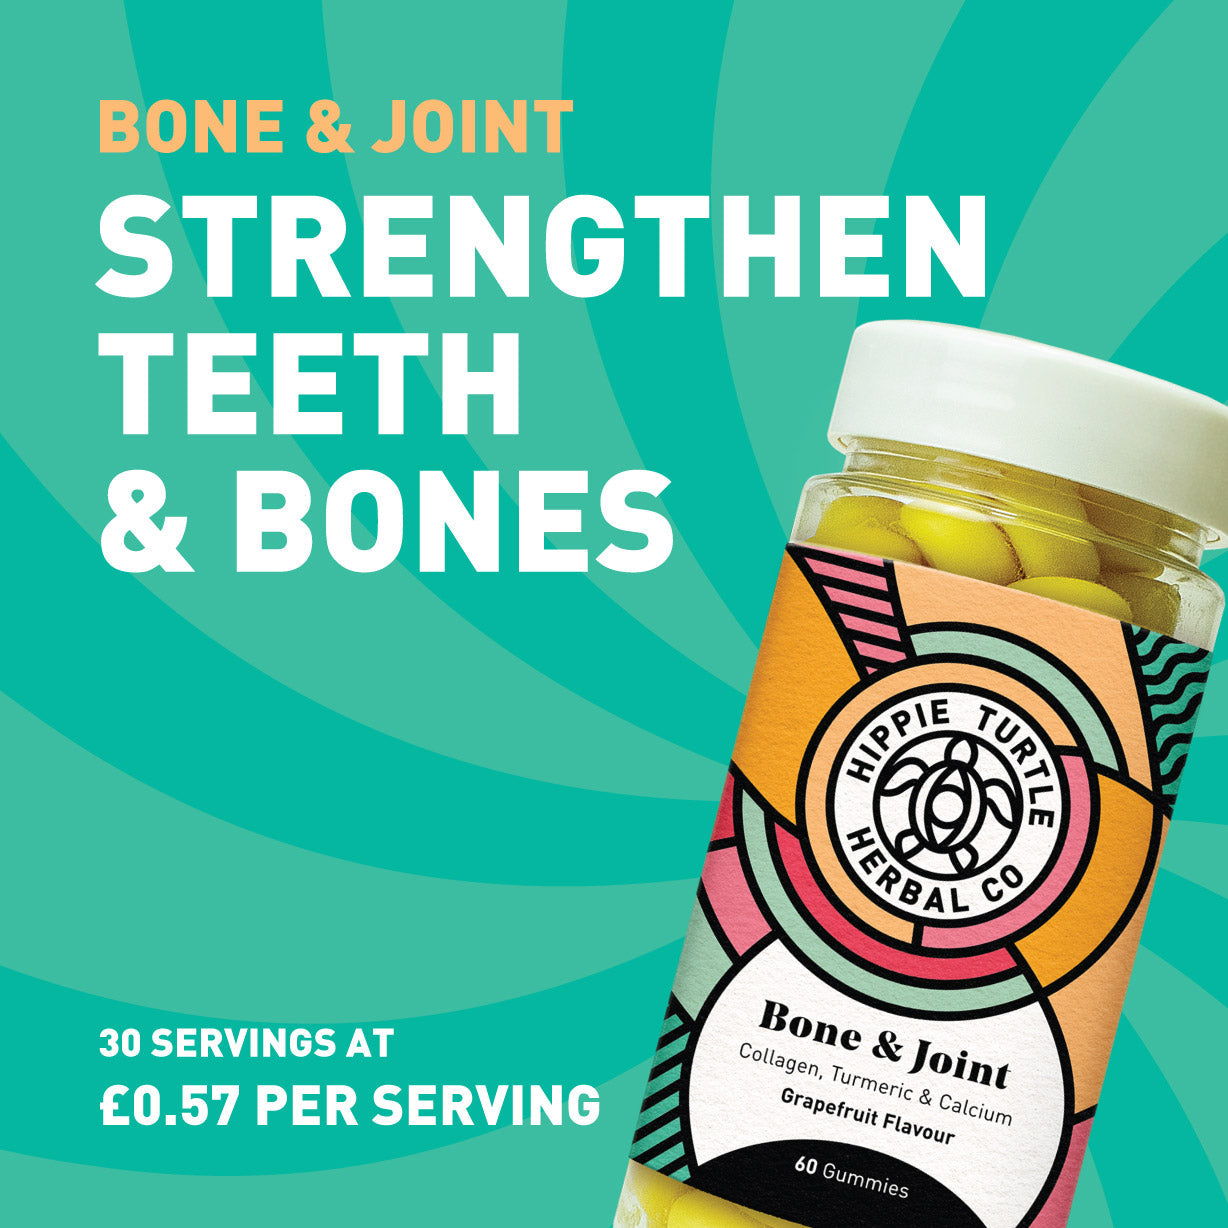 Chewable supplement gummies for healthy bones and teeth. Containing calcium, vitamin D, vitamin e, turmeric and marine collagen